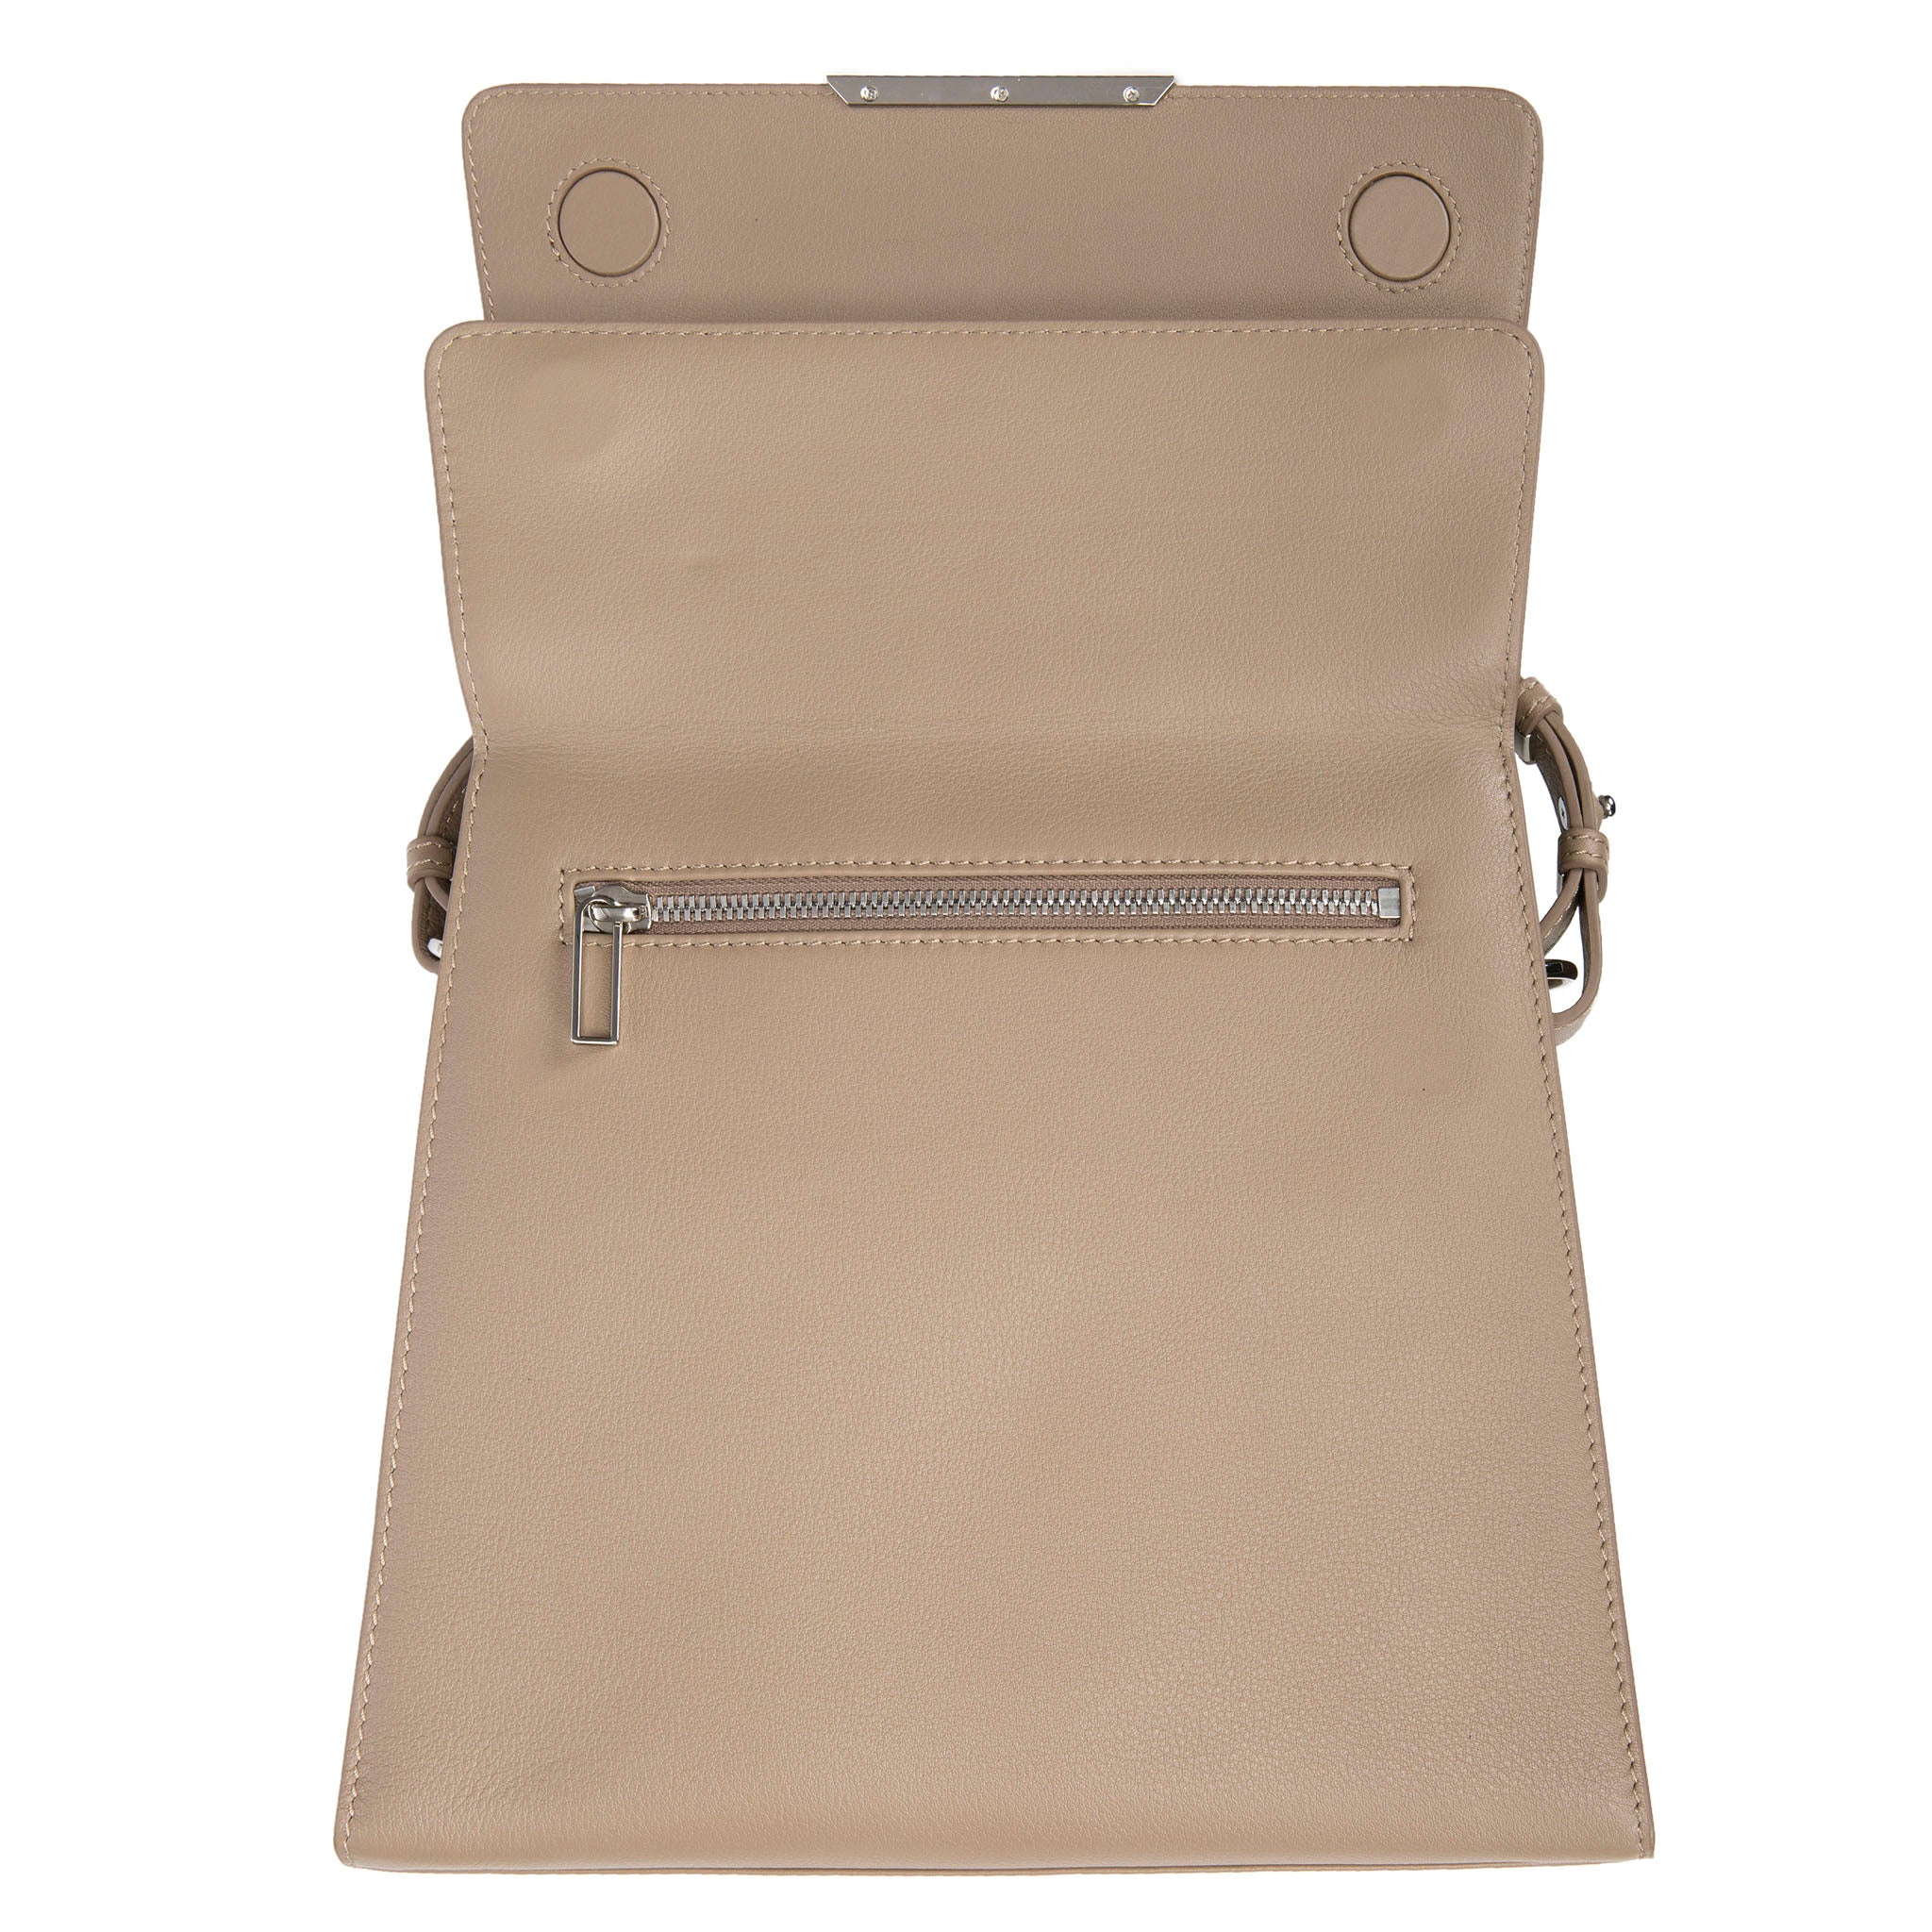 Modern Classic Crossbody Bag Gray Shagreen Top And Buff Leather Body Front Open View Jacq - Vivo Direct 